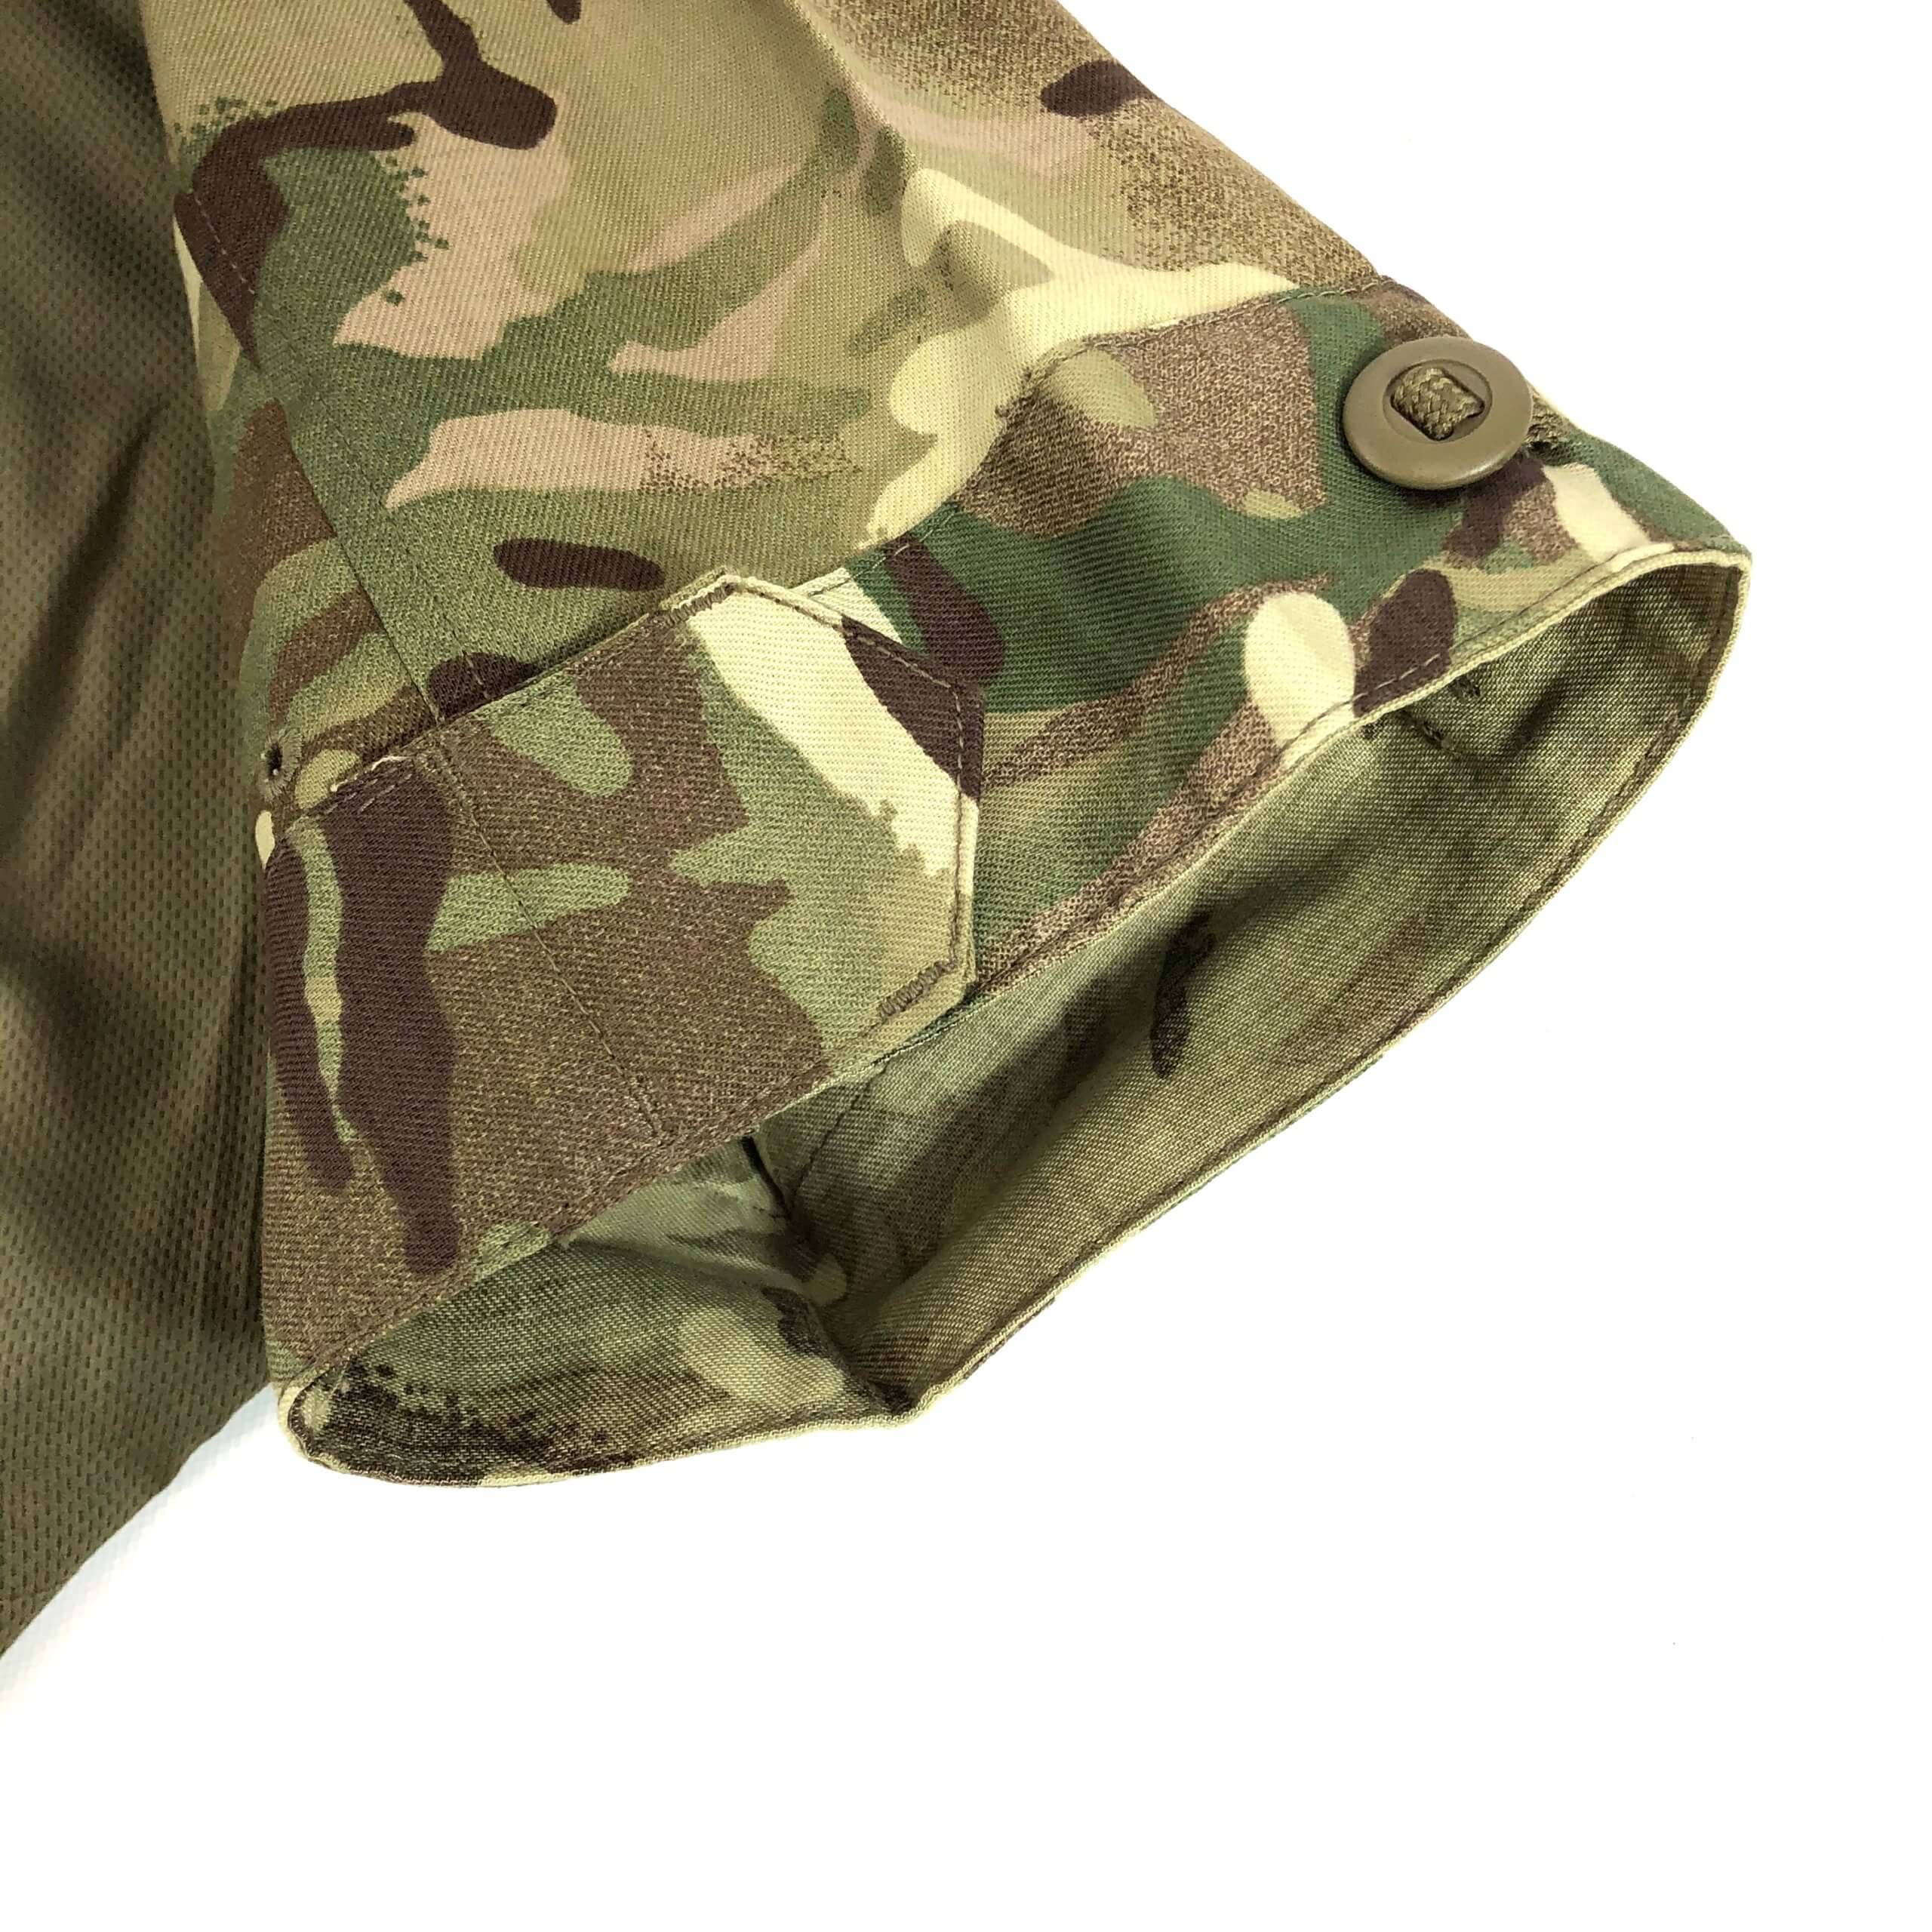 Details about   Genuine British Army Issue Multicam Camo Combat Shirt Jacket MTP All Sizes 